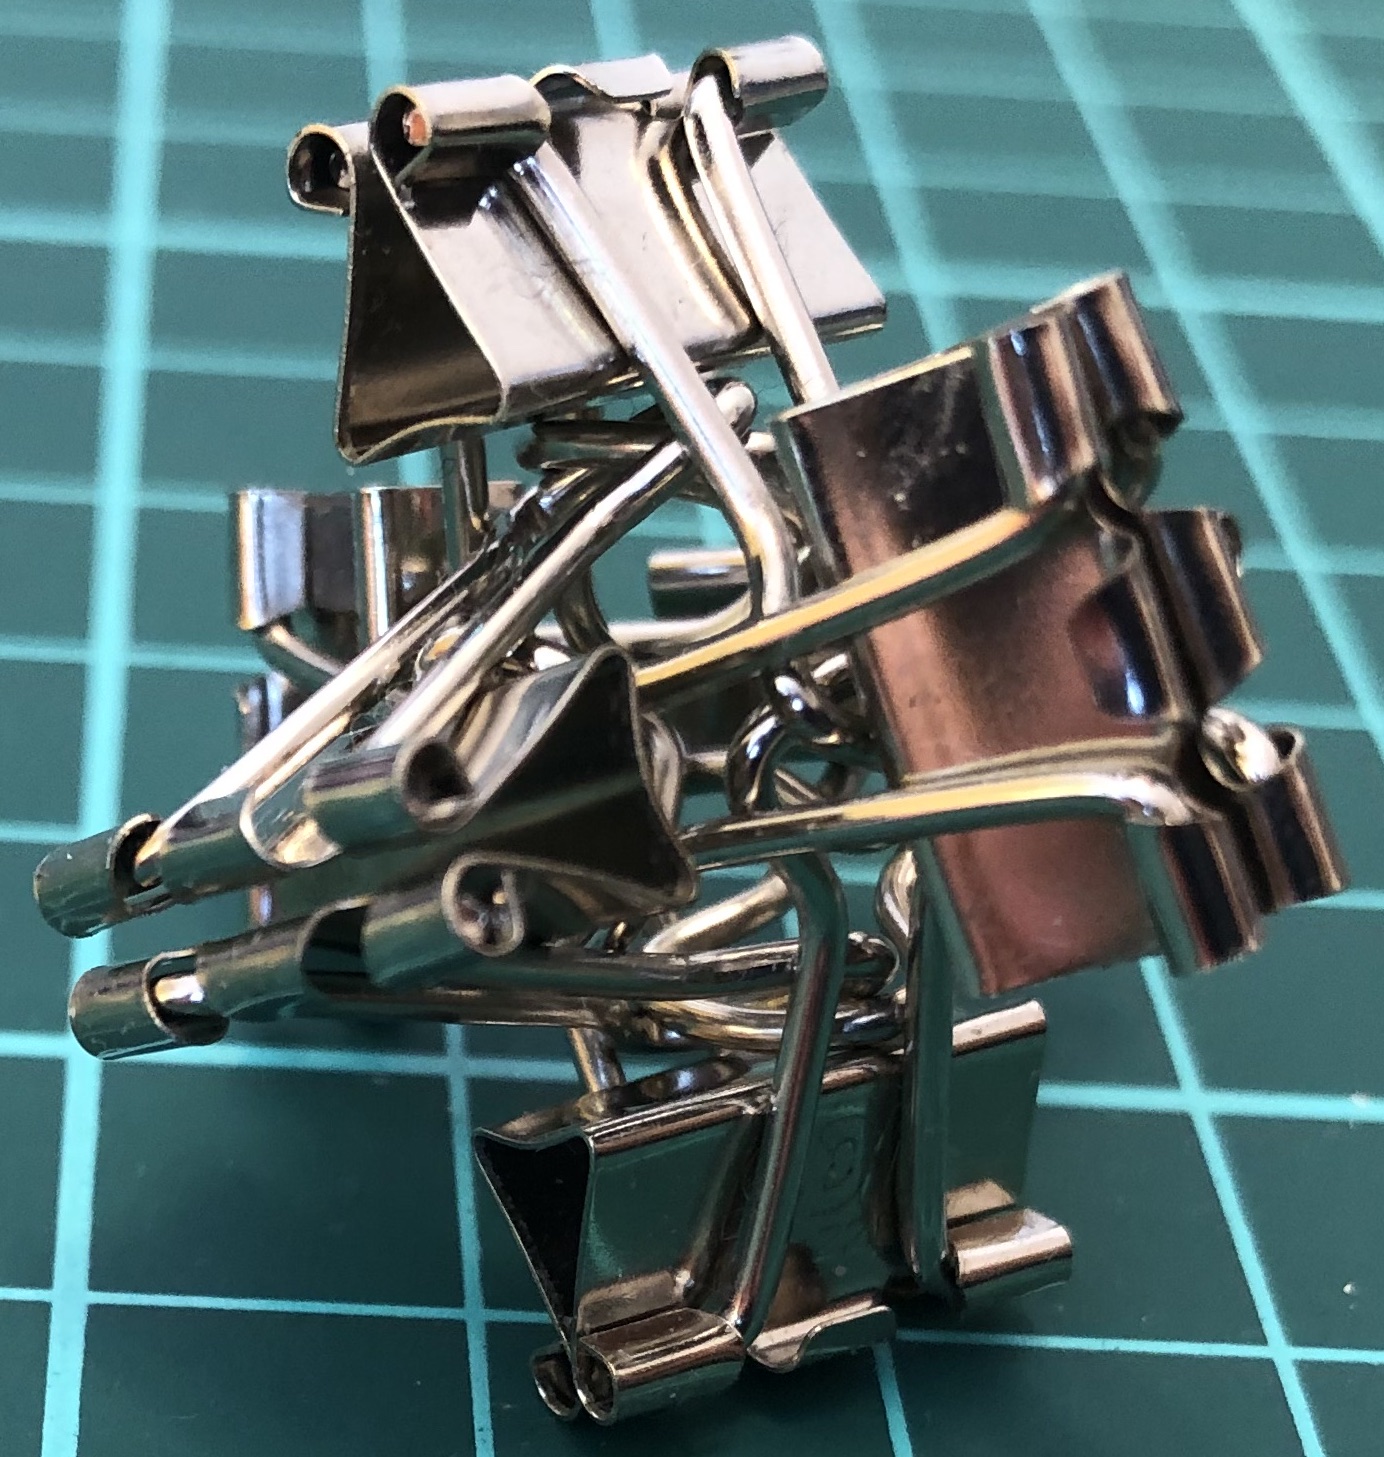 6 binder clips with mouths pointing outward